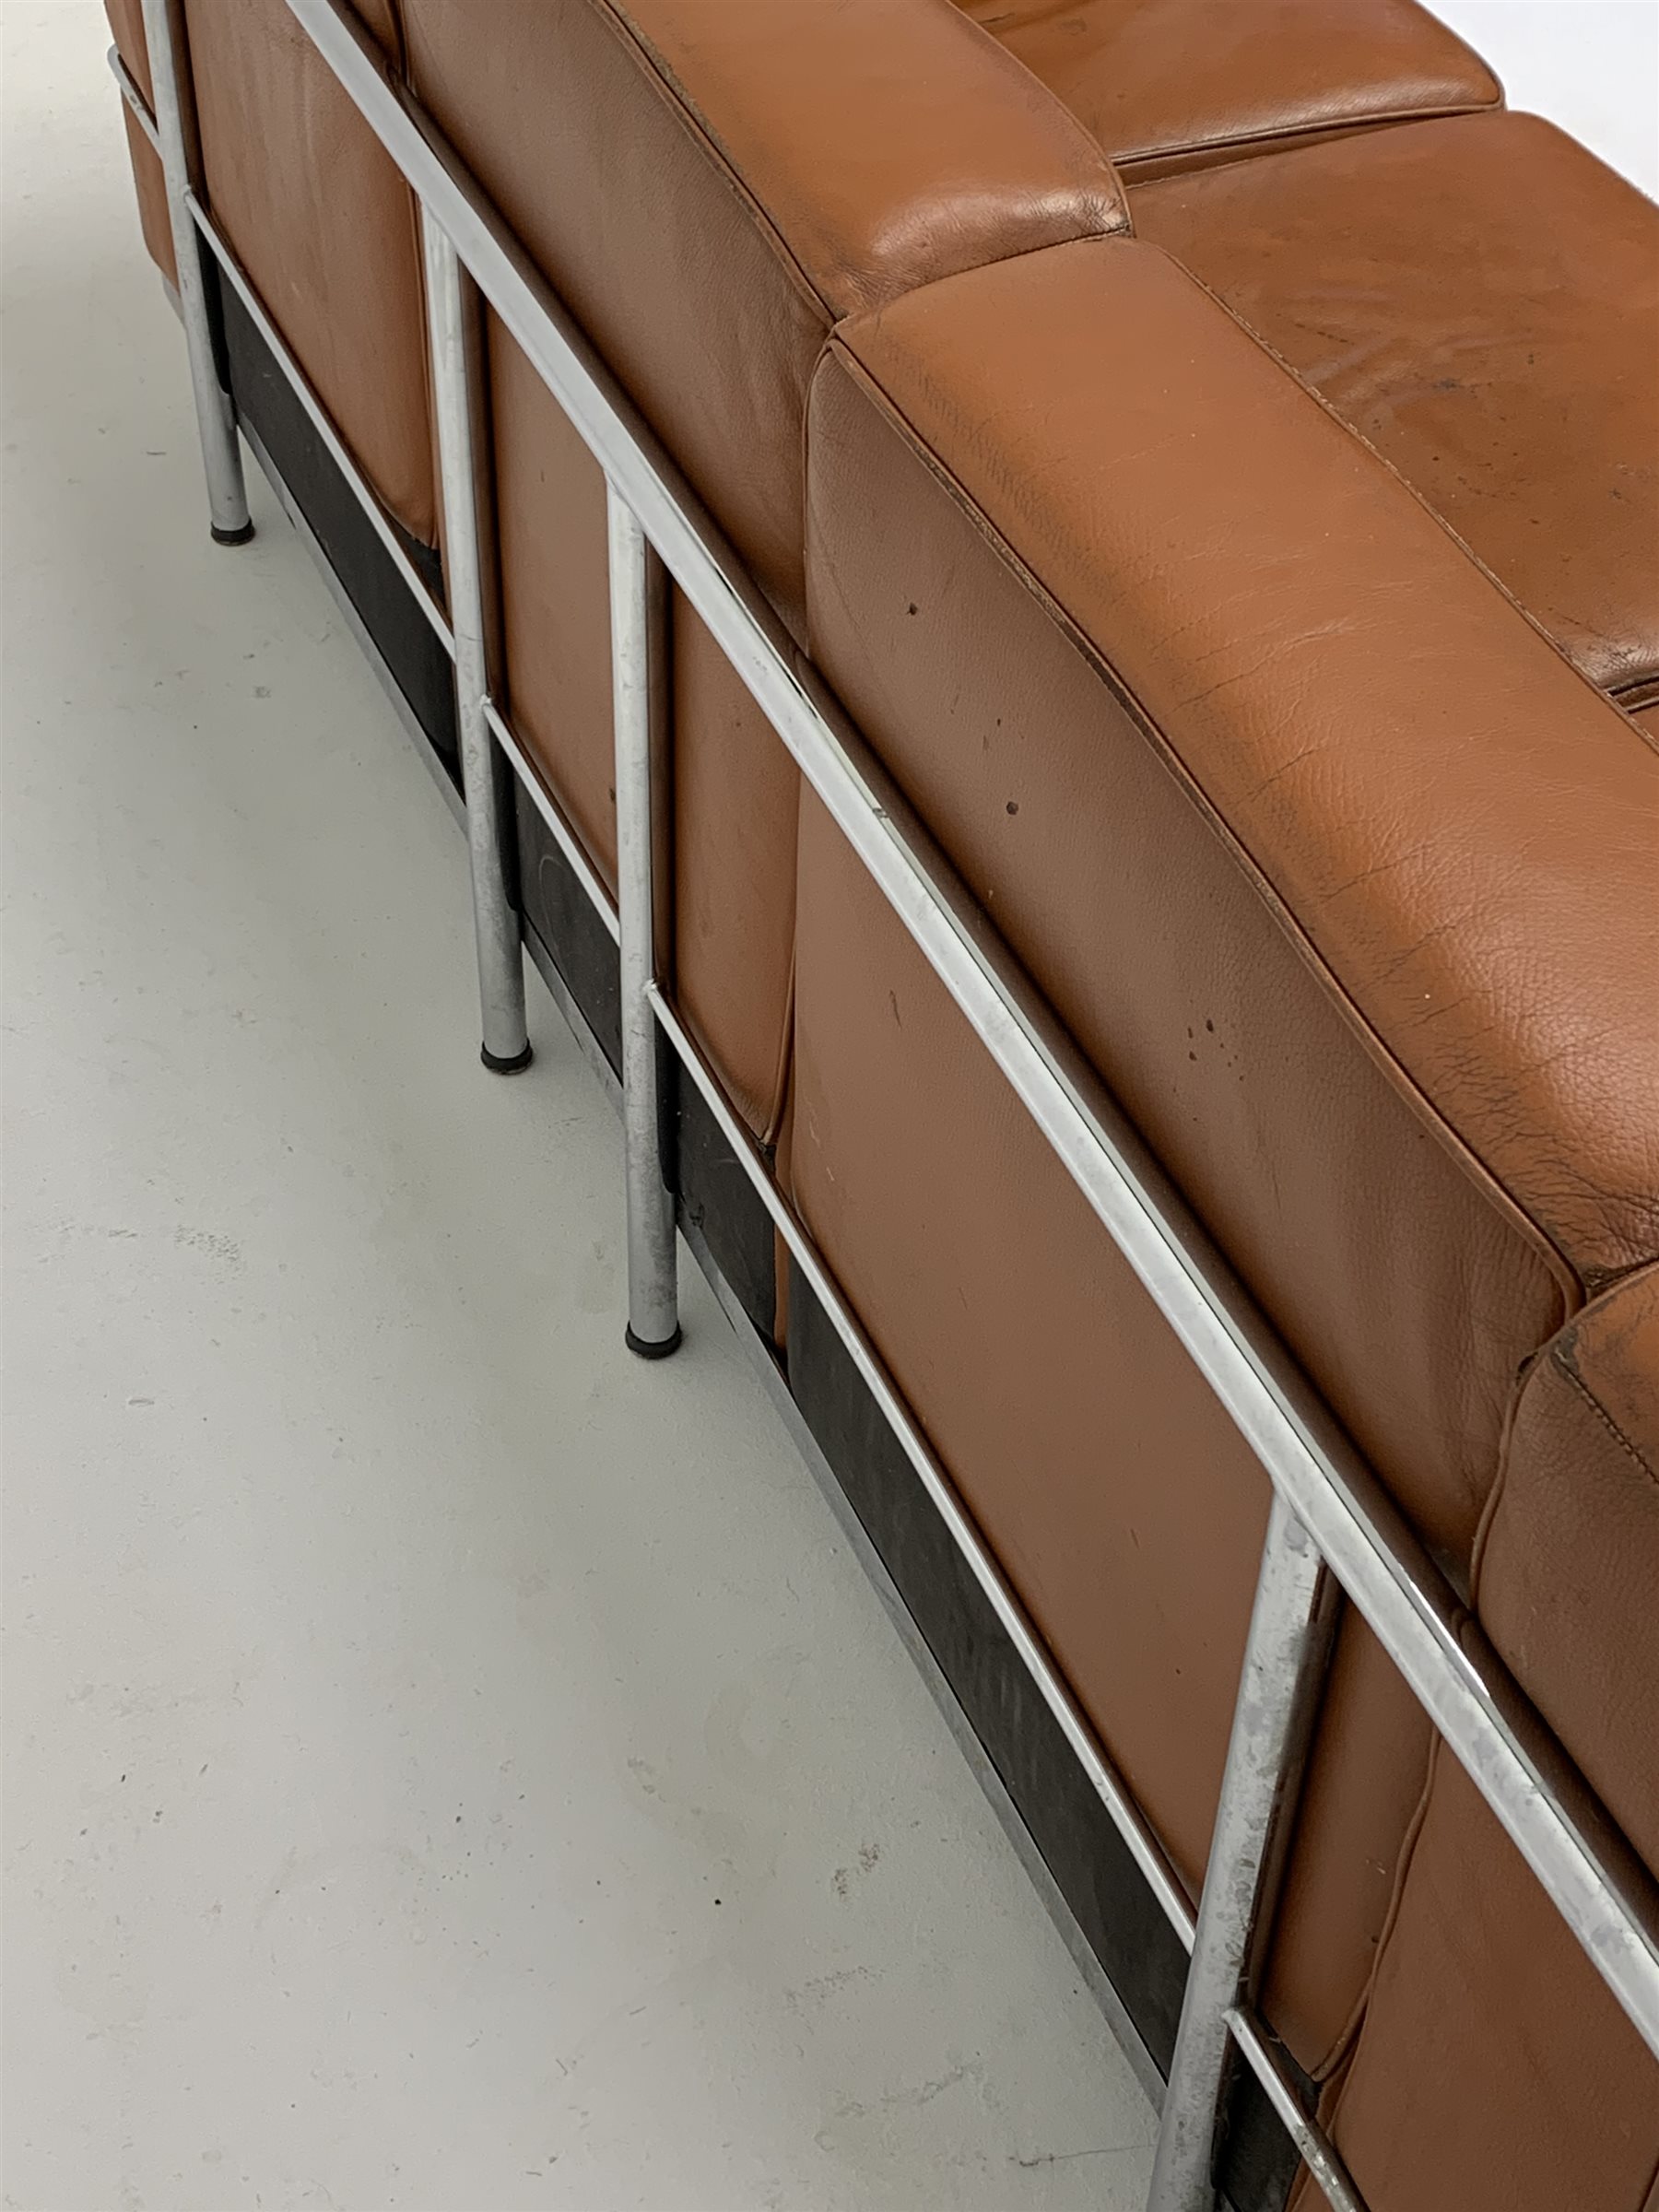 After Le Corbusier - Mid 20th century three seat sofa with chrome frame and brown leather upholstere - Image 4 of 4